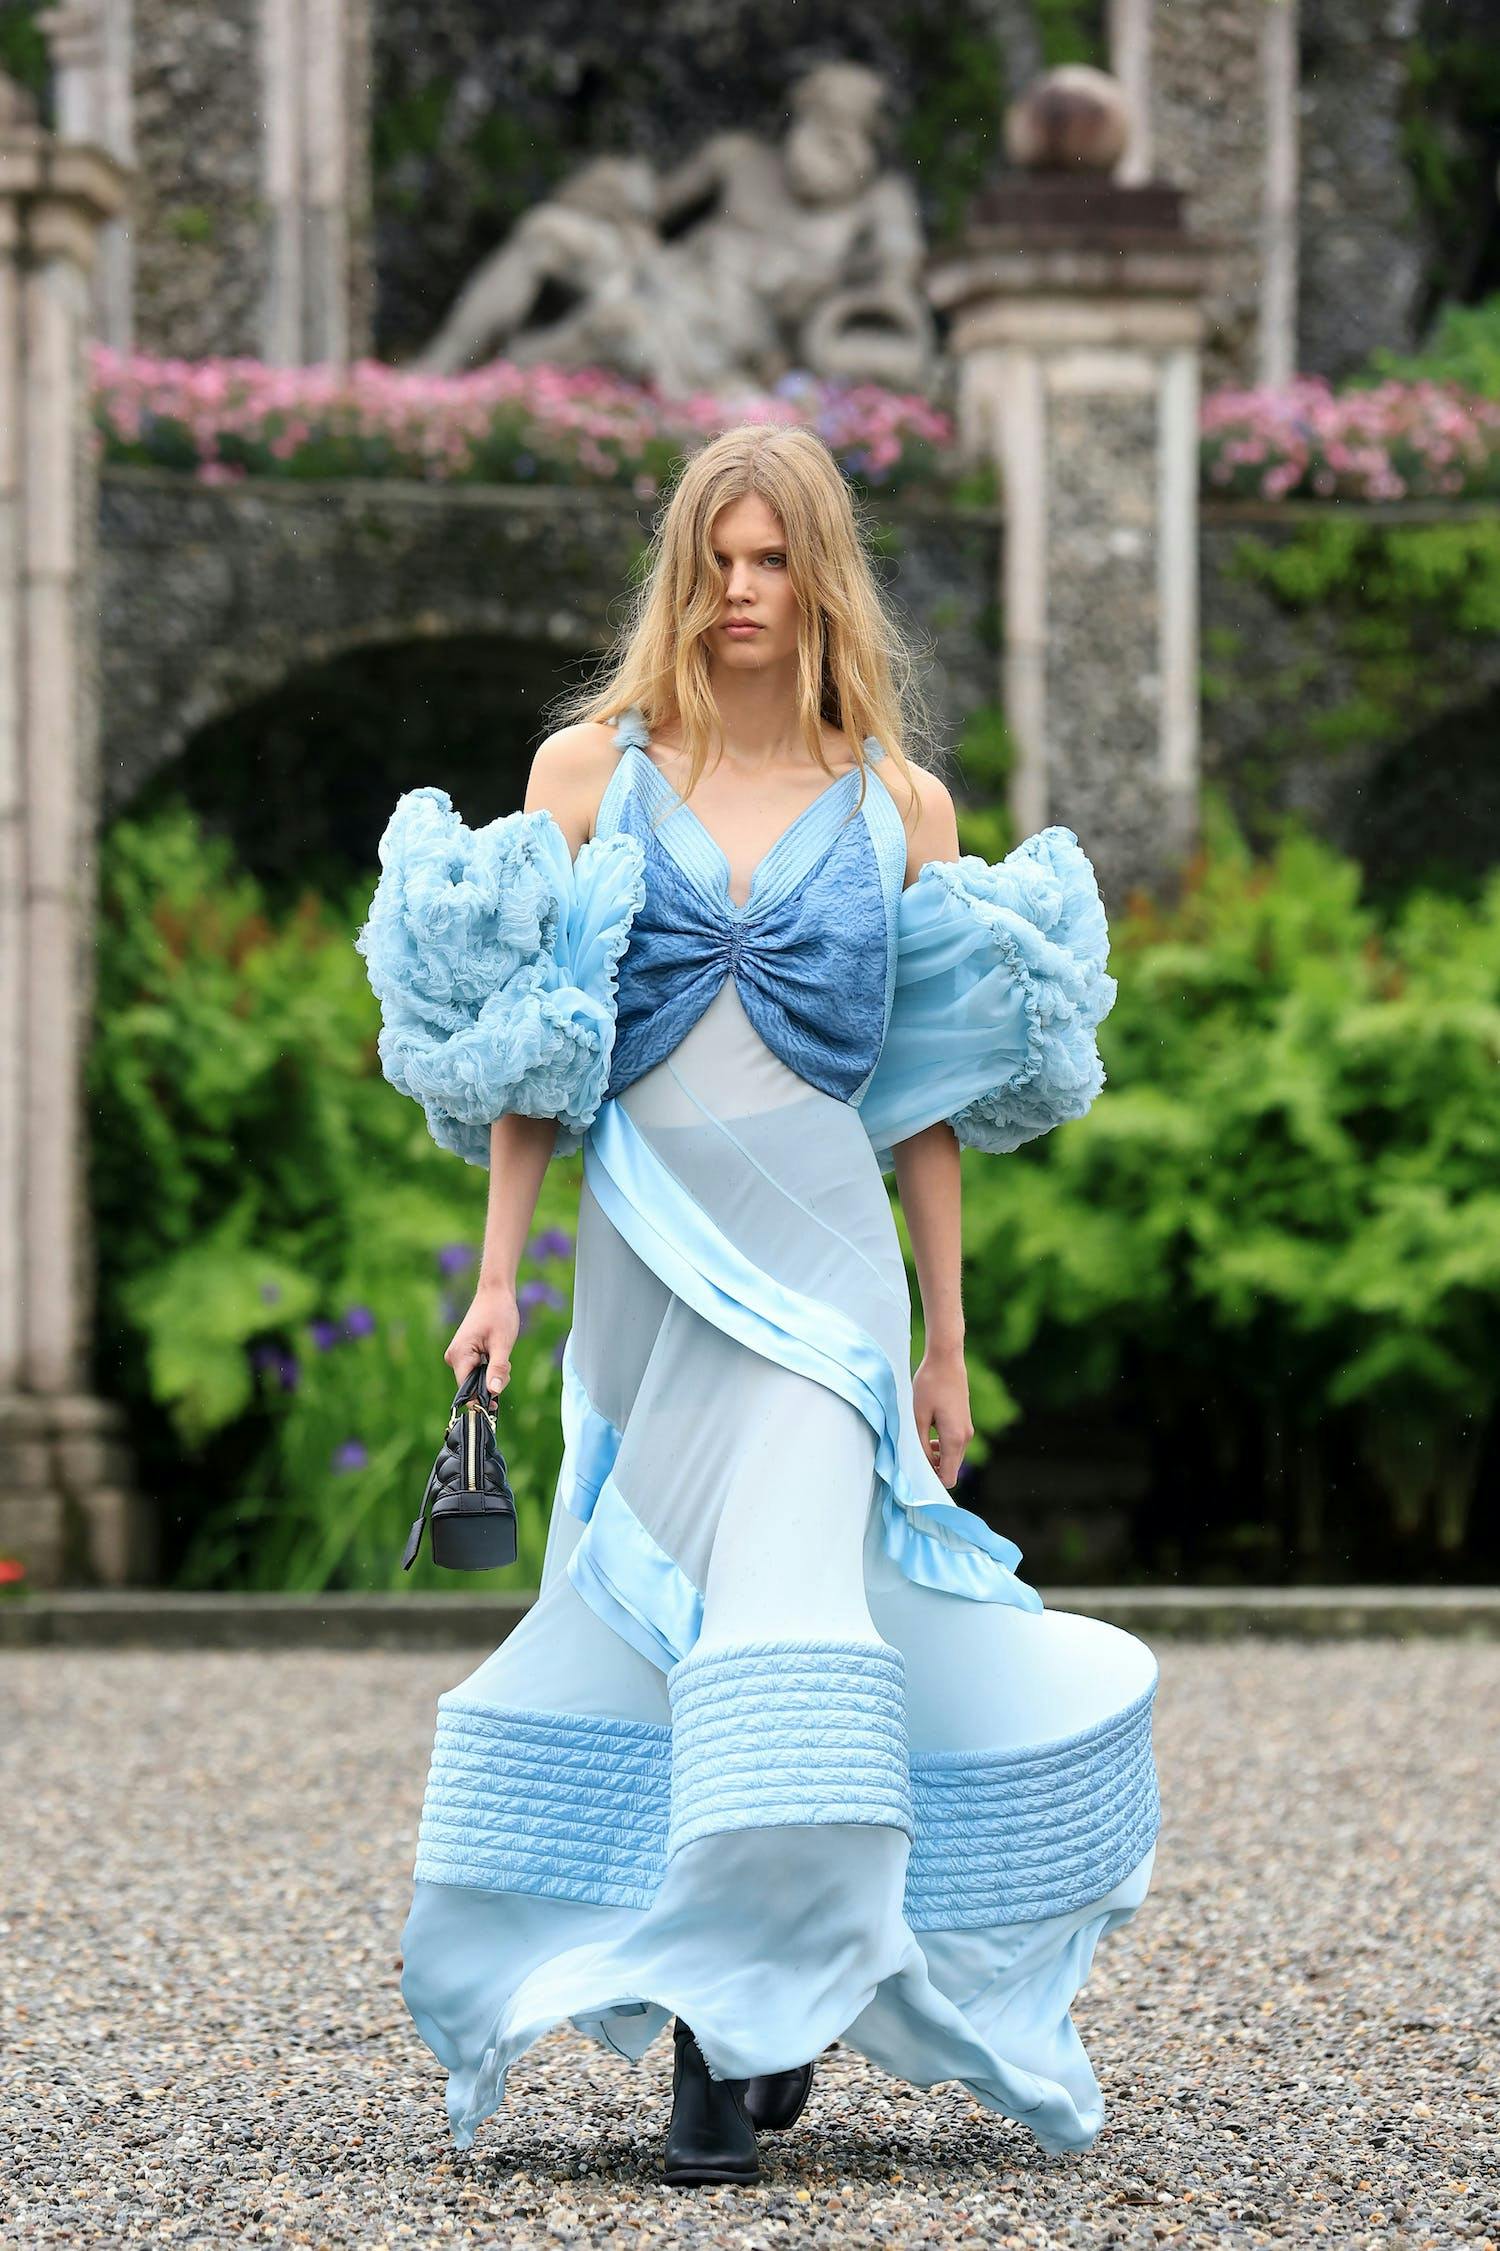 A model in a blue gown for Louis Vuitton.